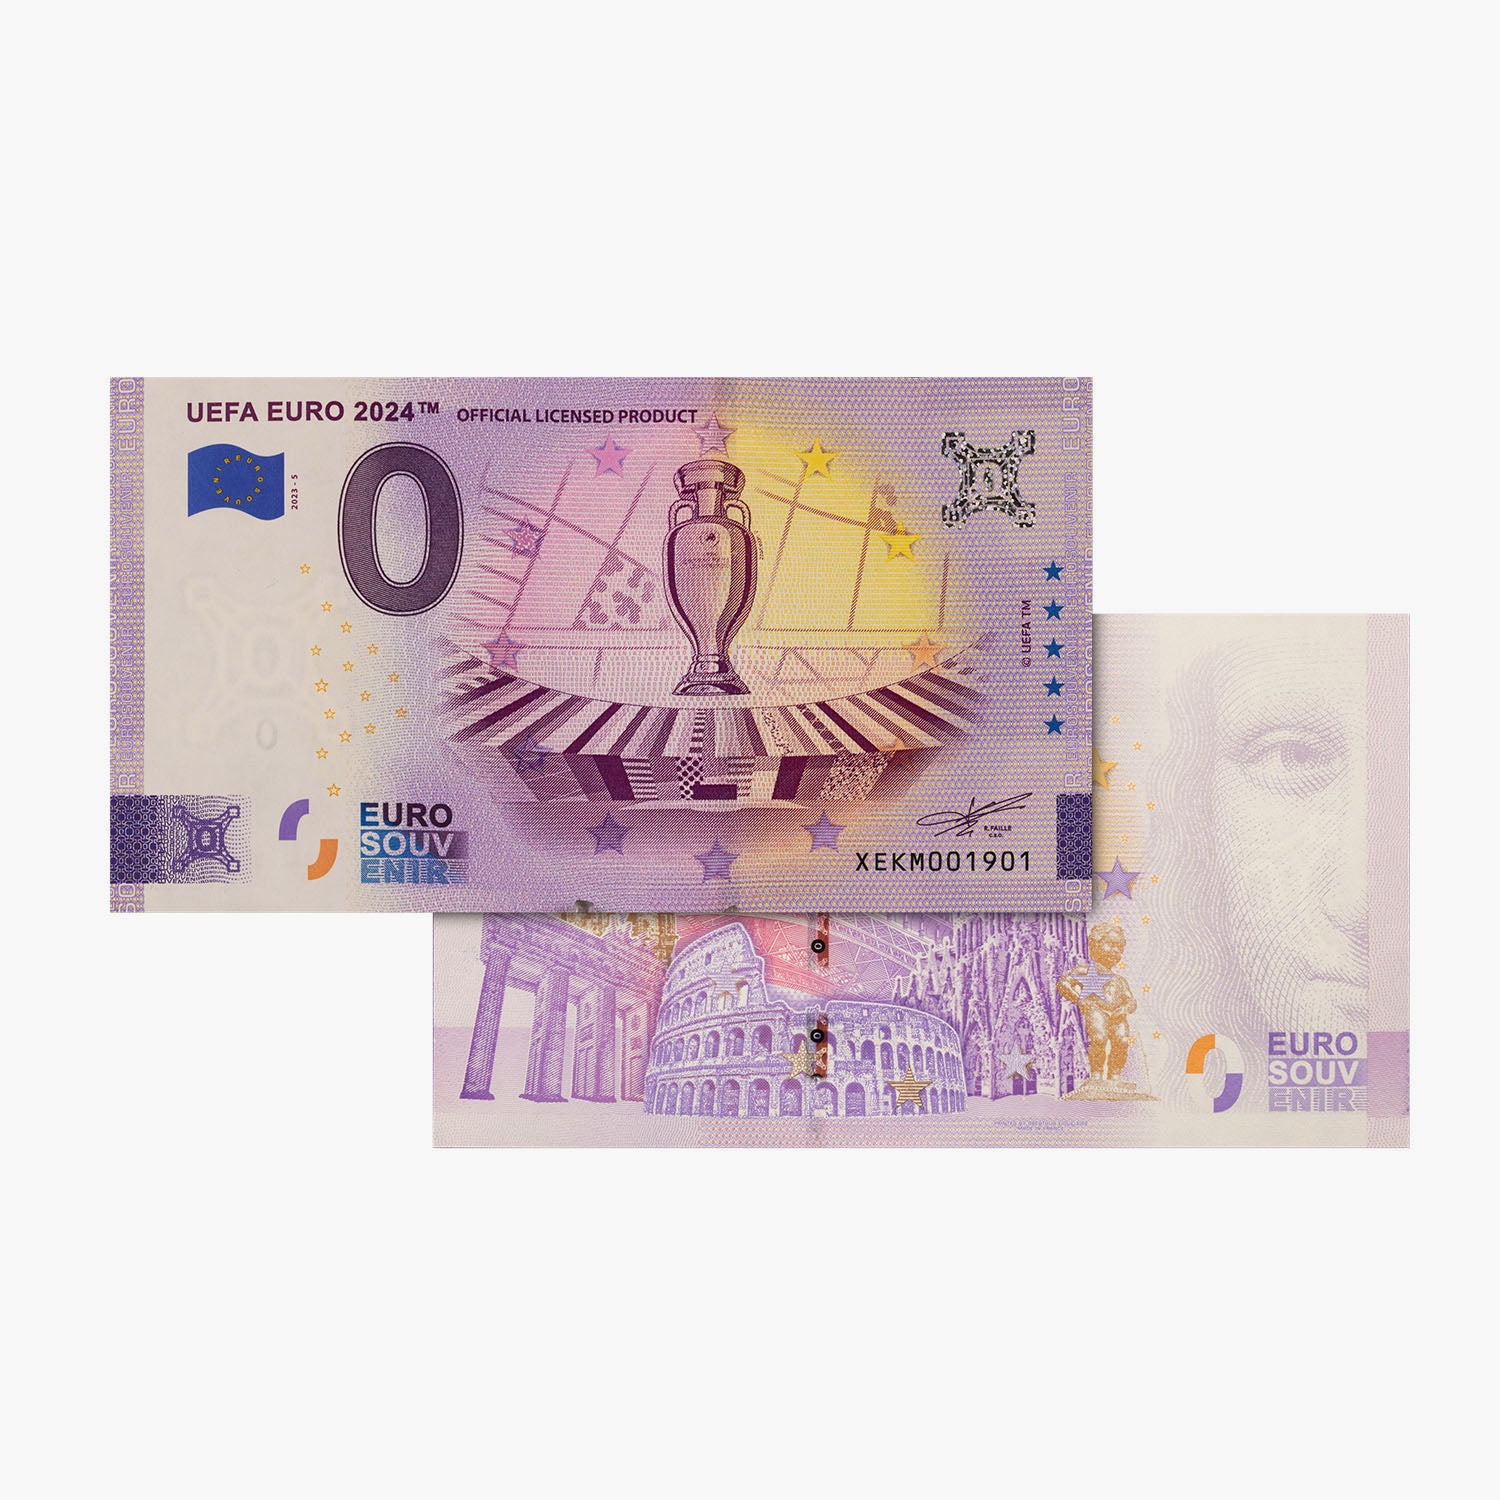 UEFA EURO 2024 Official 0 € Bank Note Set In Wallet